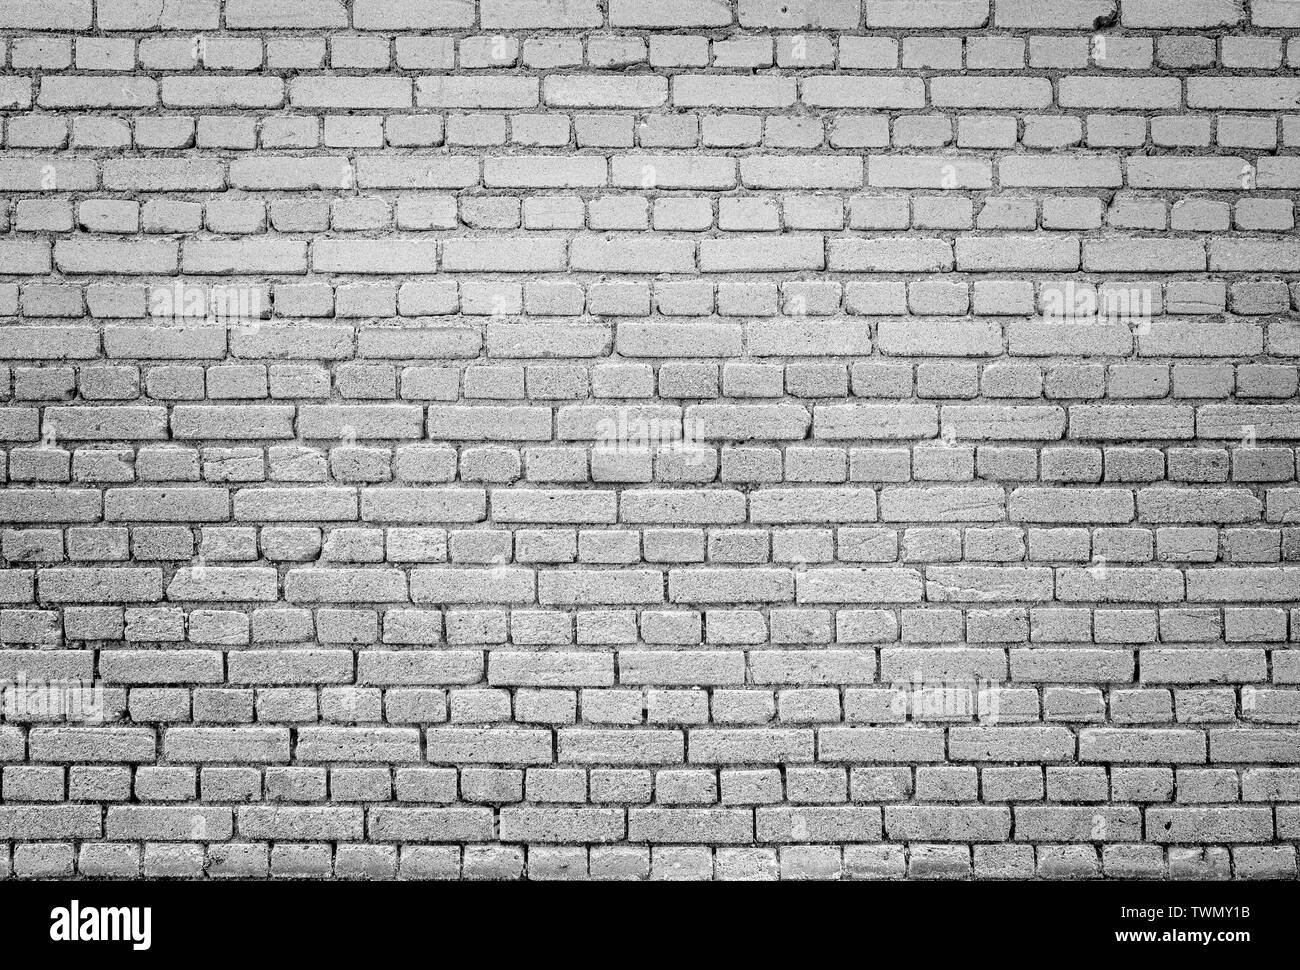 High resolution full frame background of detailed old brick wall in black and white with vignetting. Stock Photo